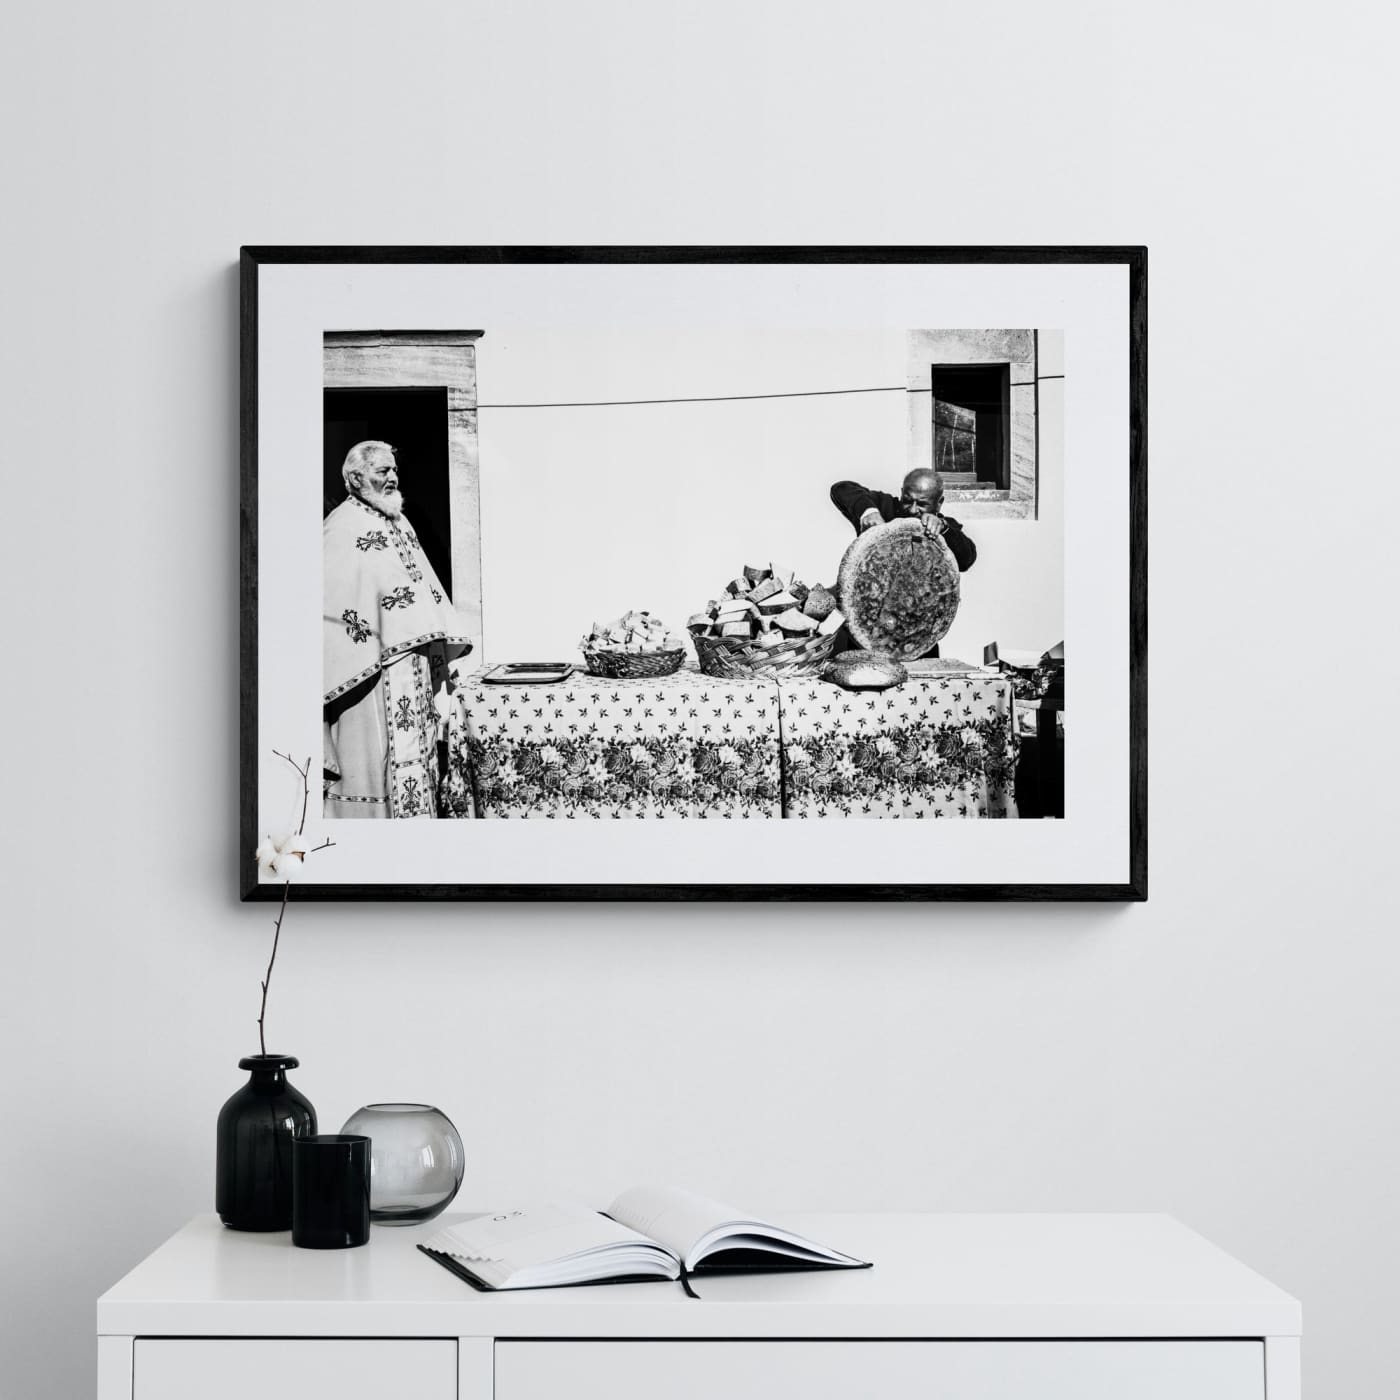 Black and White Photography Wall Art Greece | Cutting bread during a feast in Tristomo Olympos Karpathos Dodecanese by George Tatakis - single framed photo